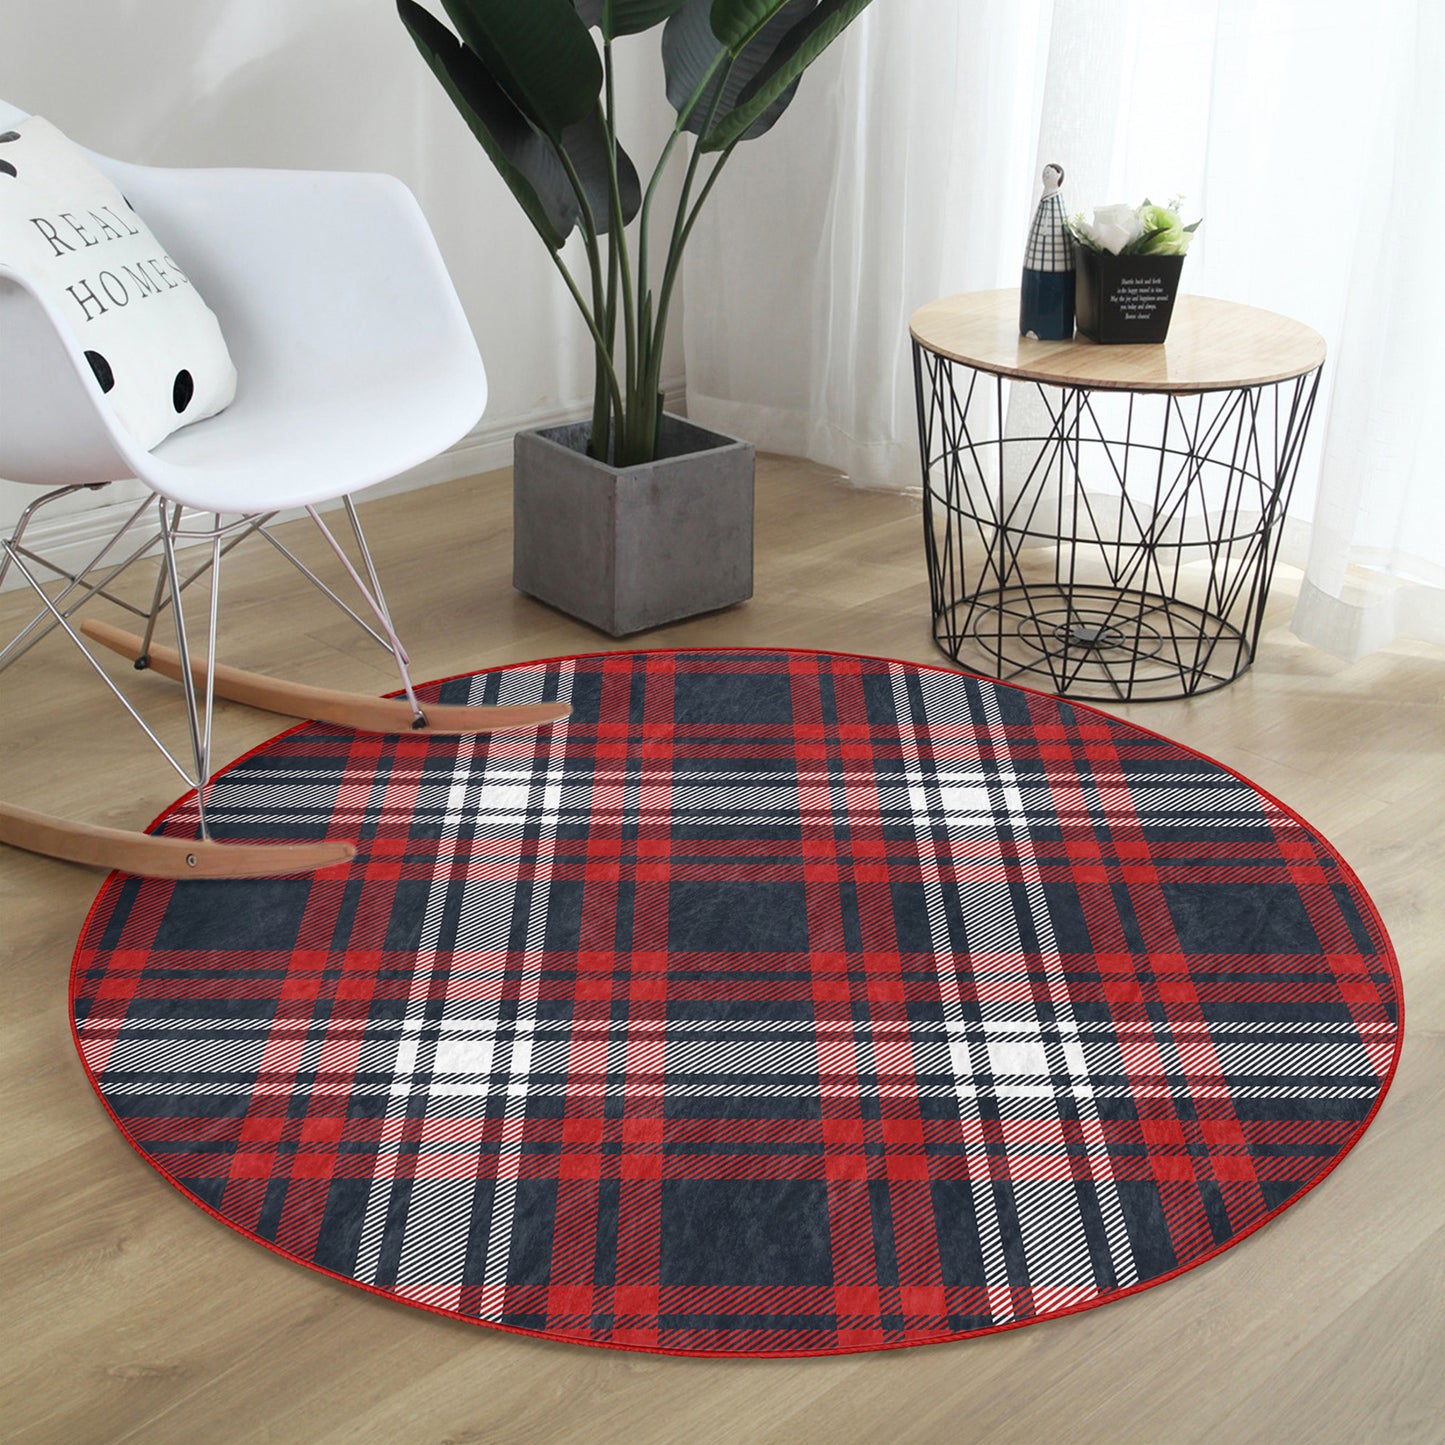 Washable Rug with Red Plaid Pattern - Easy Maintenance